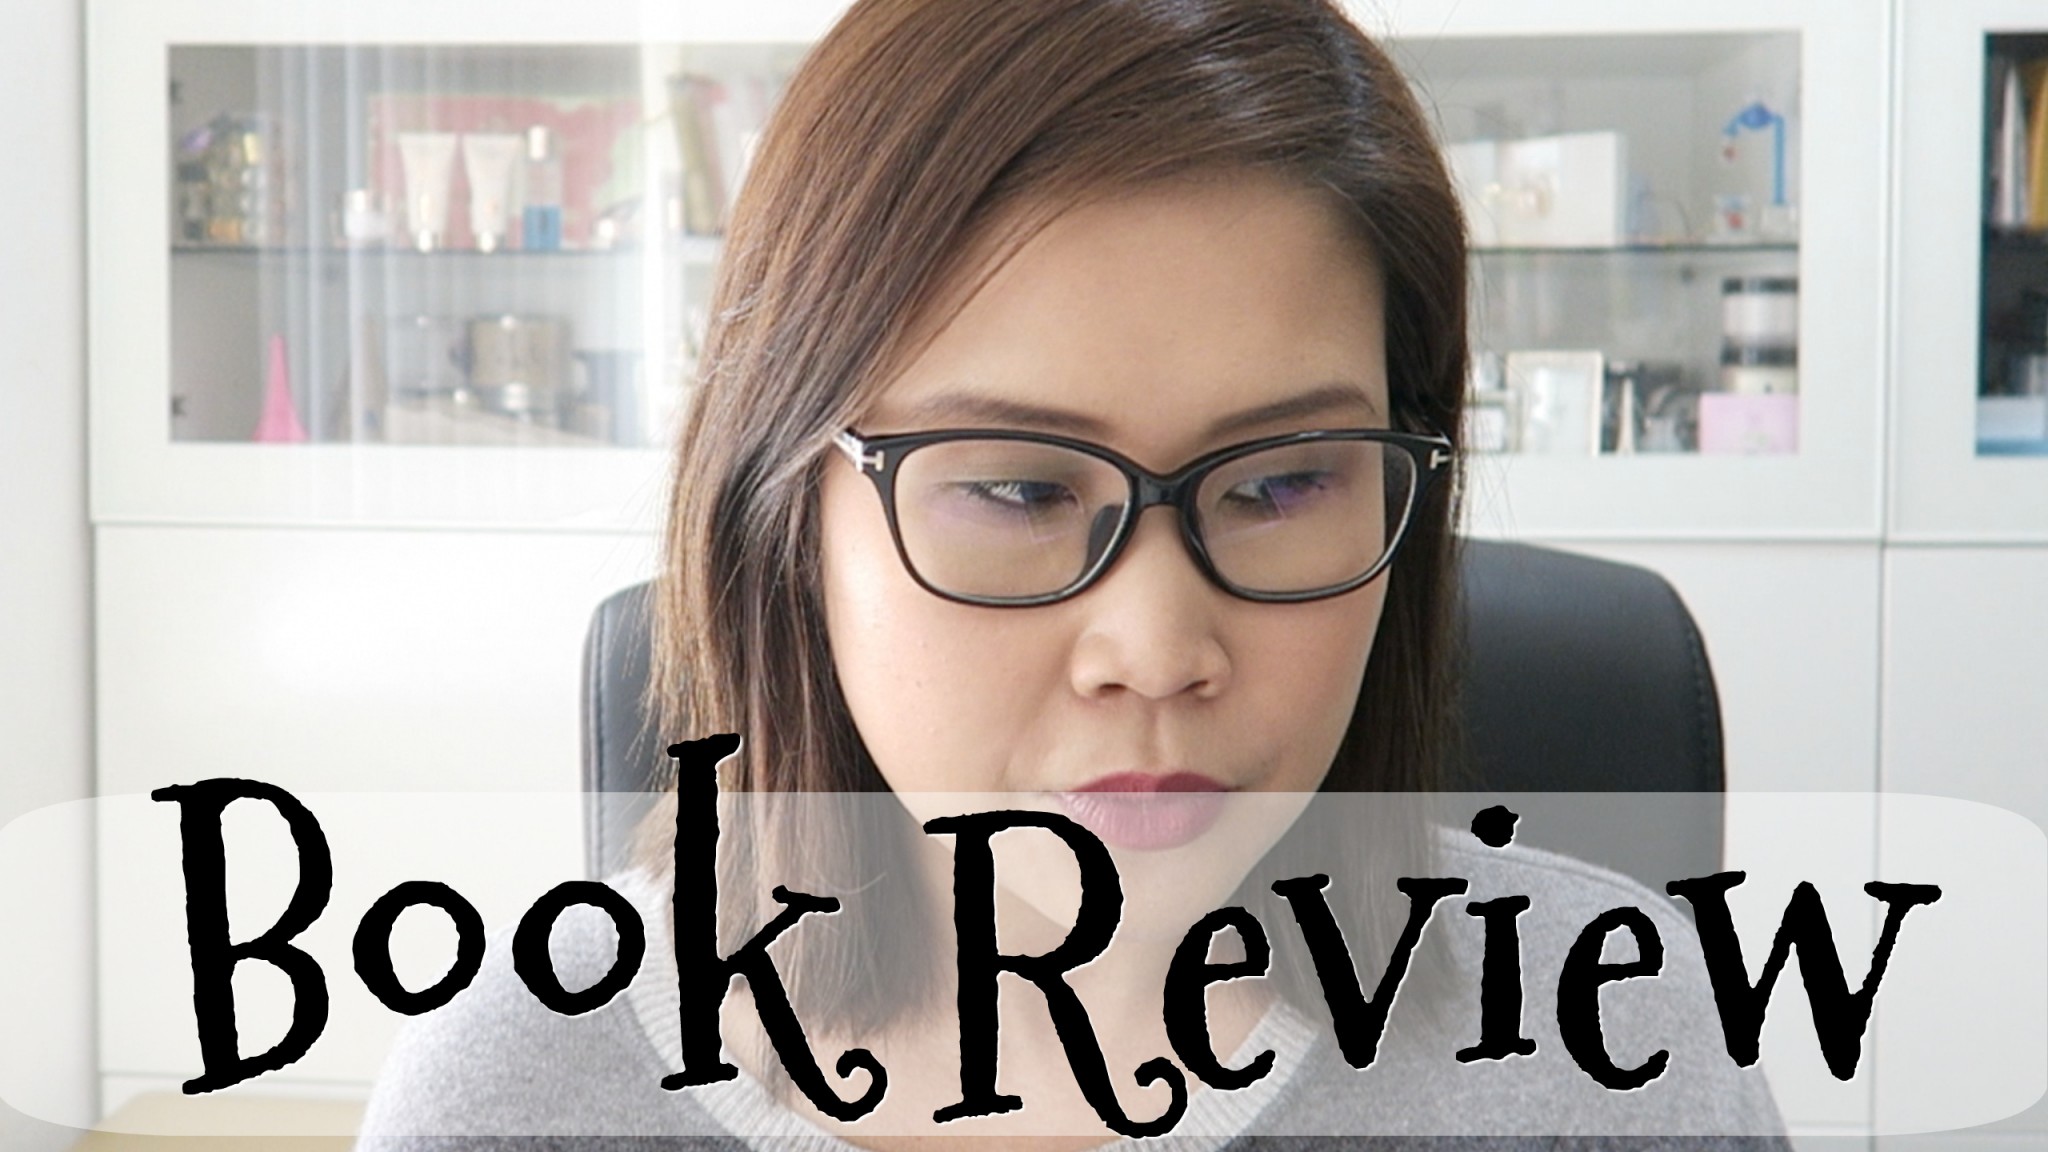 Book Review + Positive Thinking